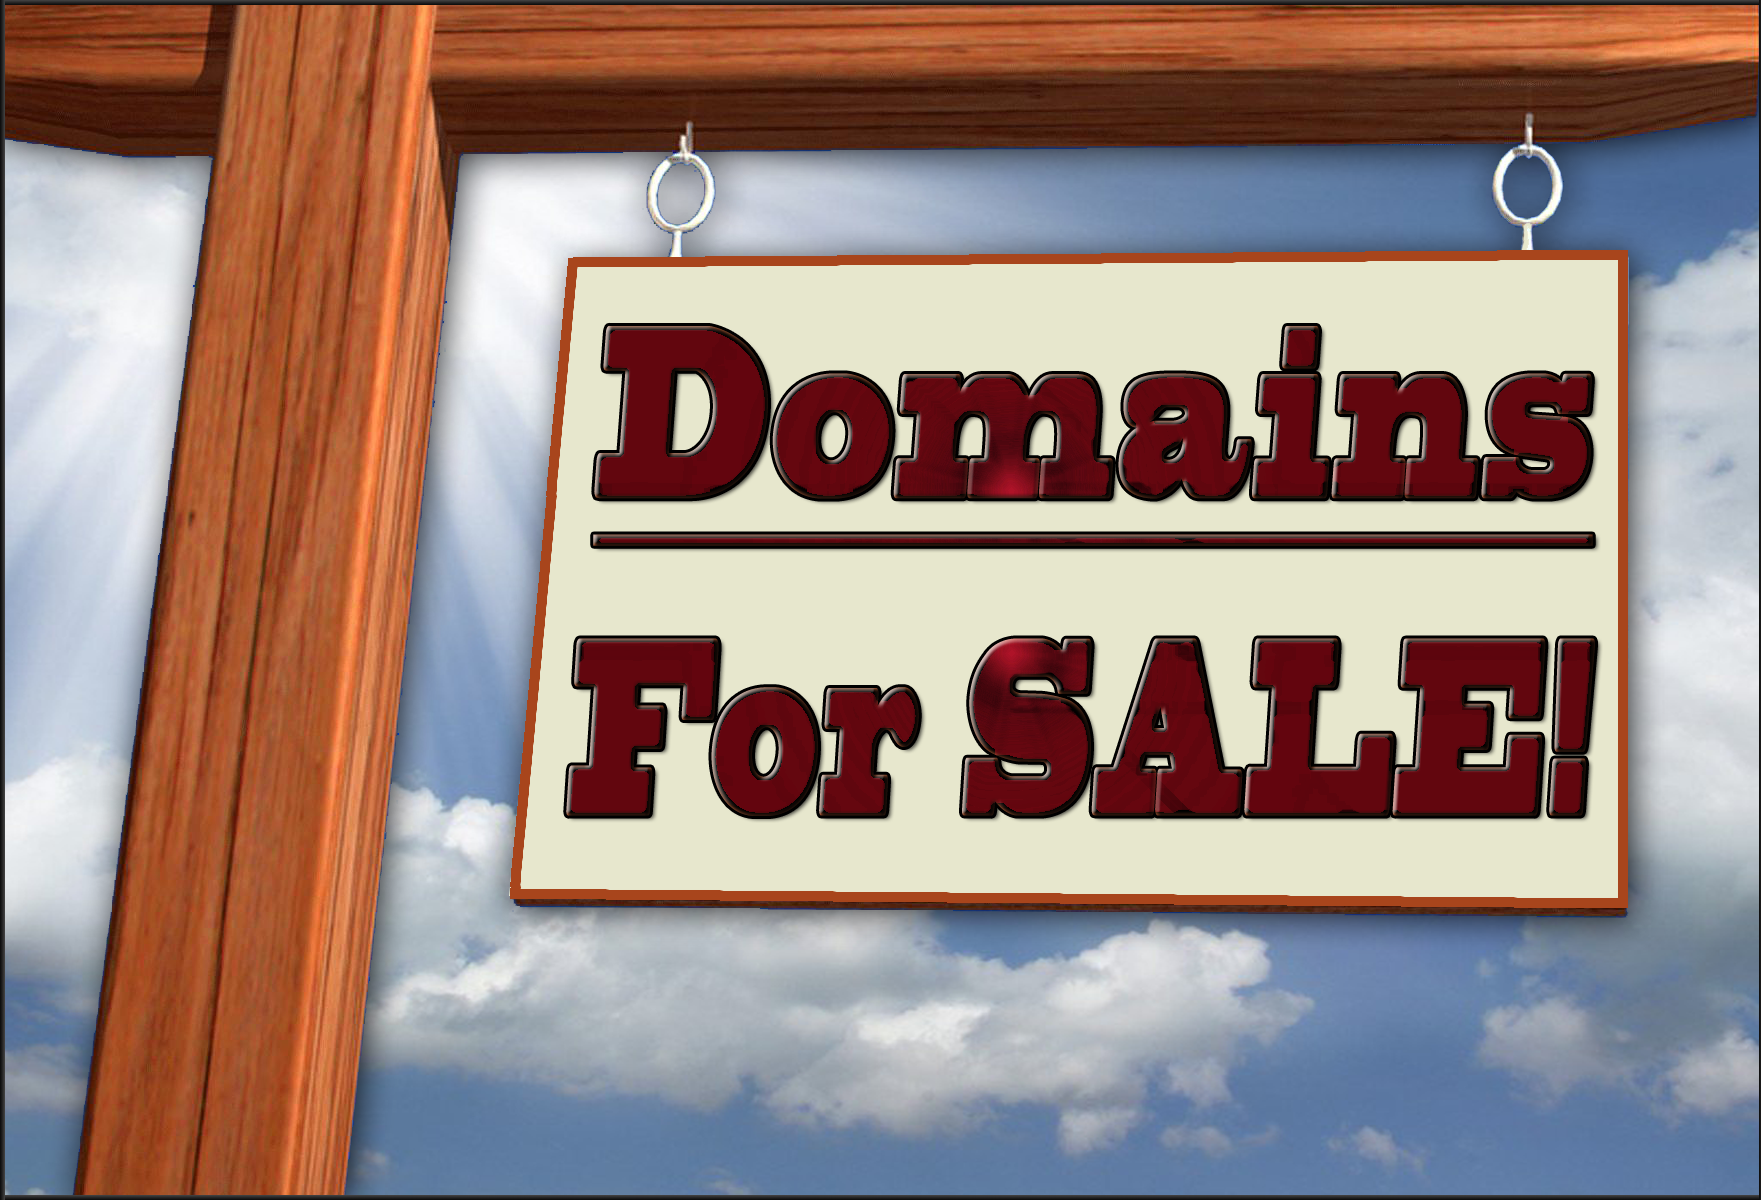 Web Domain Poker.com Is for Sale: Buy It Now for $20 Million?